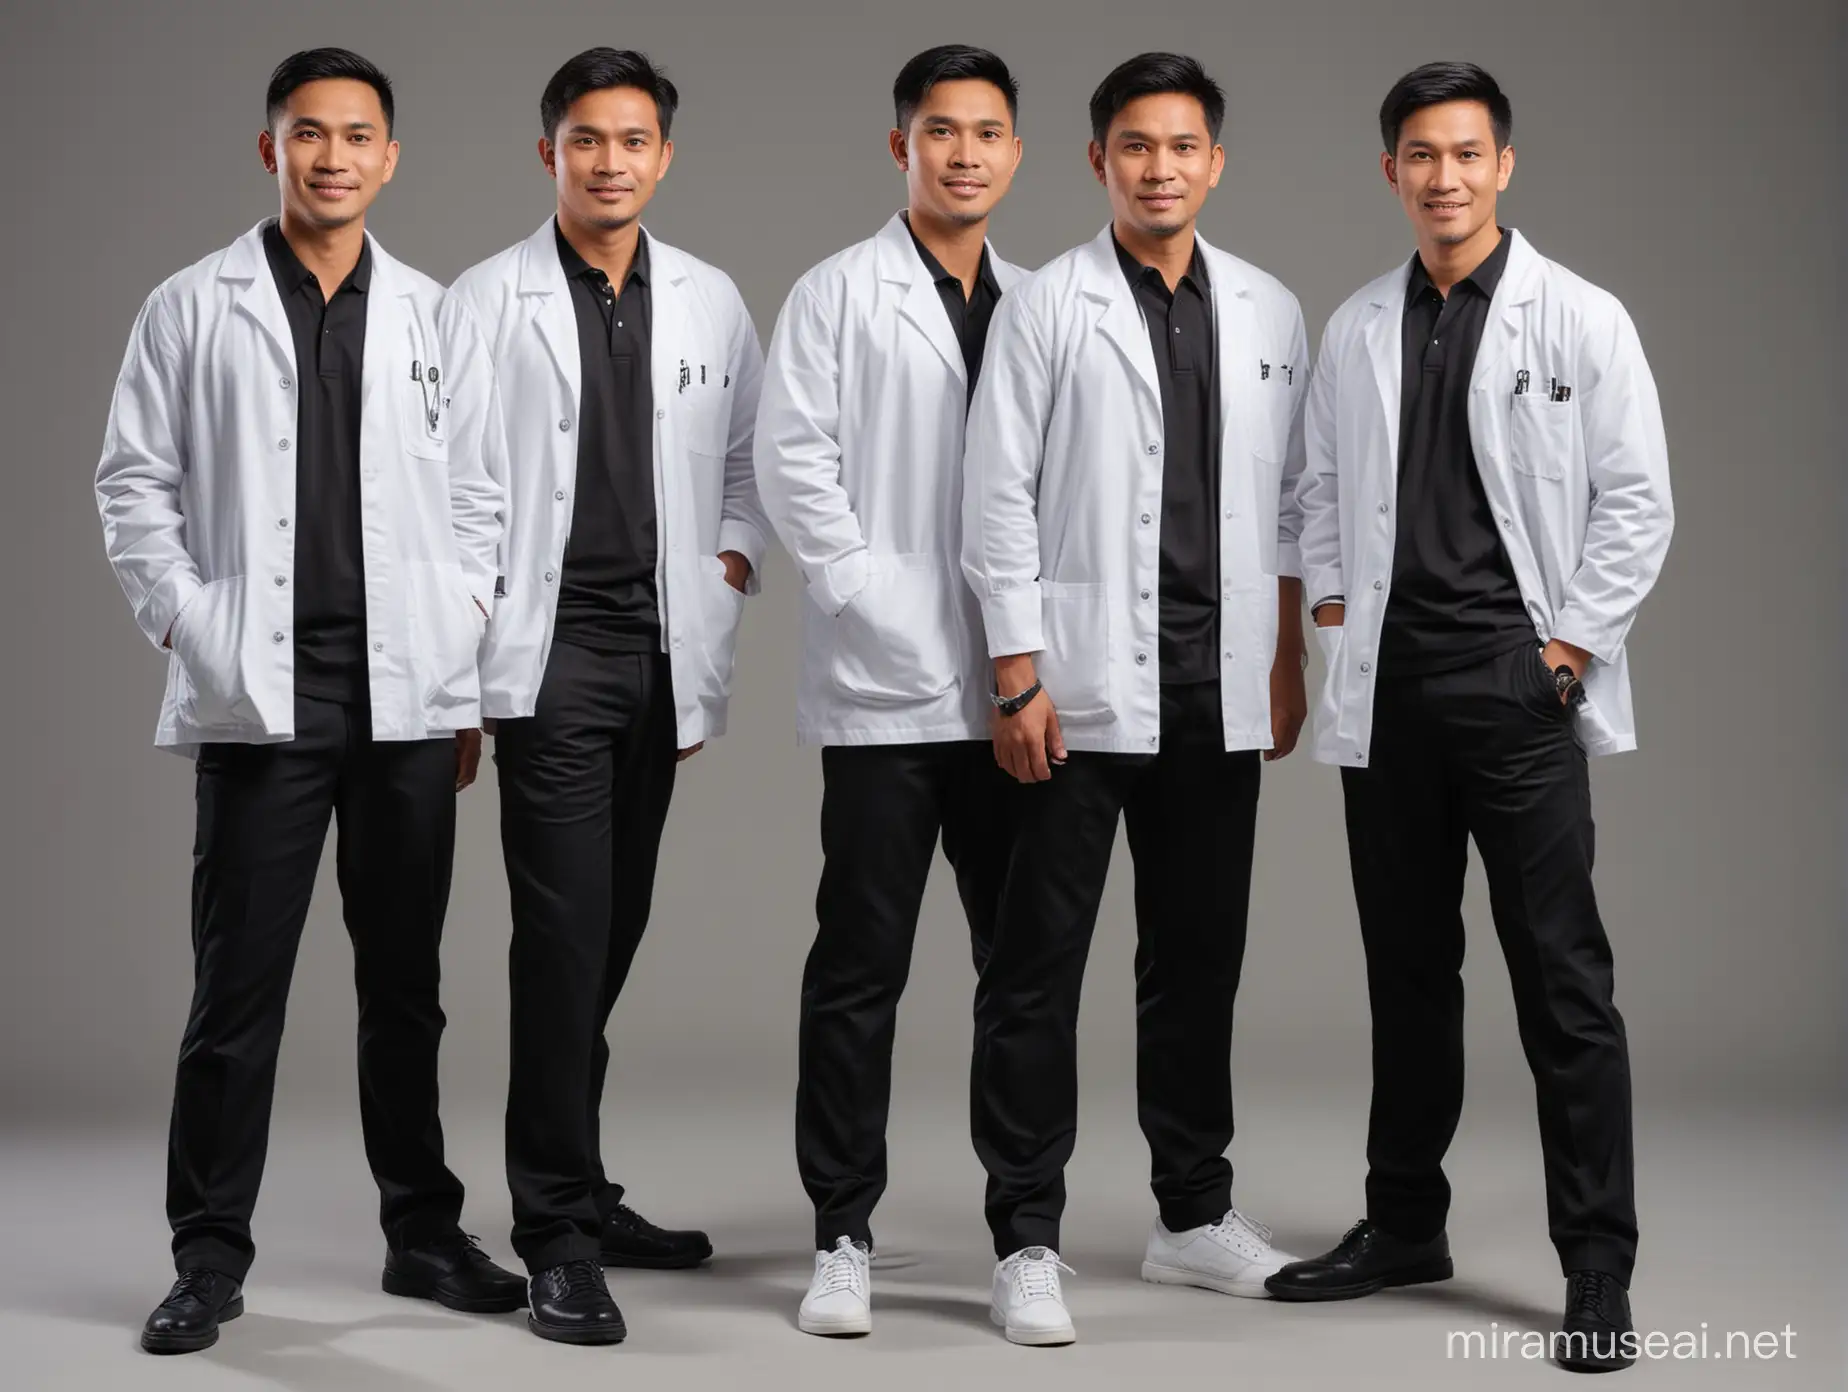 Indonesian Male Doctors in White Outer Jackets